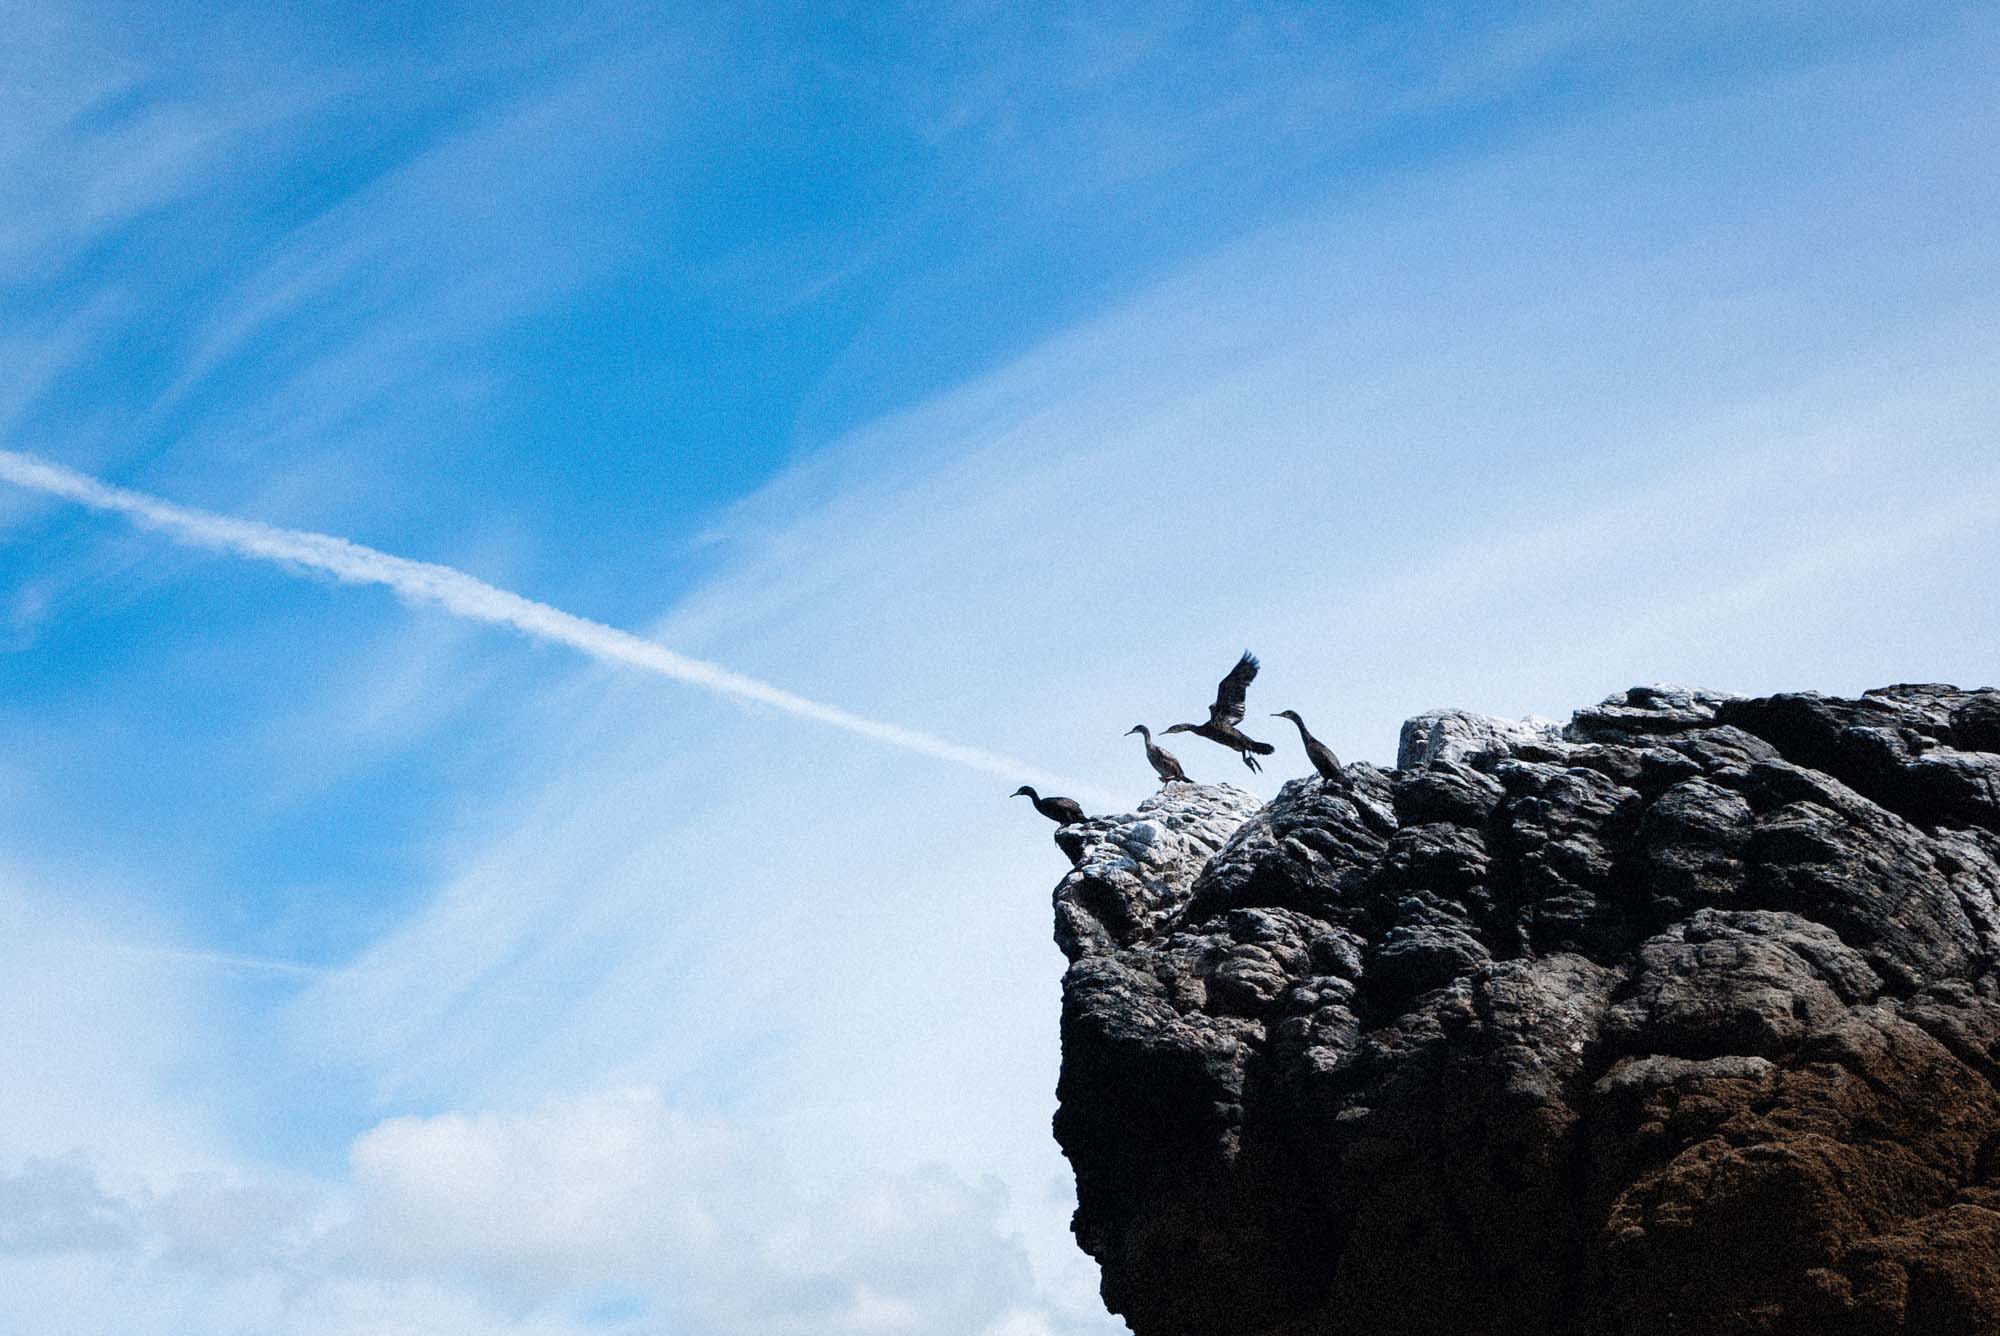 ..but there are times it can be limiting.. on the other hand it forces a bit of creativity sometimes.. like when trying to document some of the local bird life… One of my photographer friends described this photo as 'a statement on flight' given the vapour trail but I prefer 'Shags on a rock'.